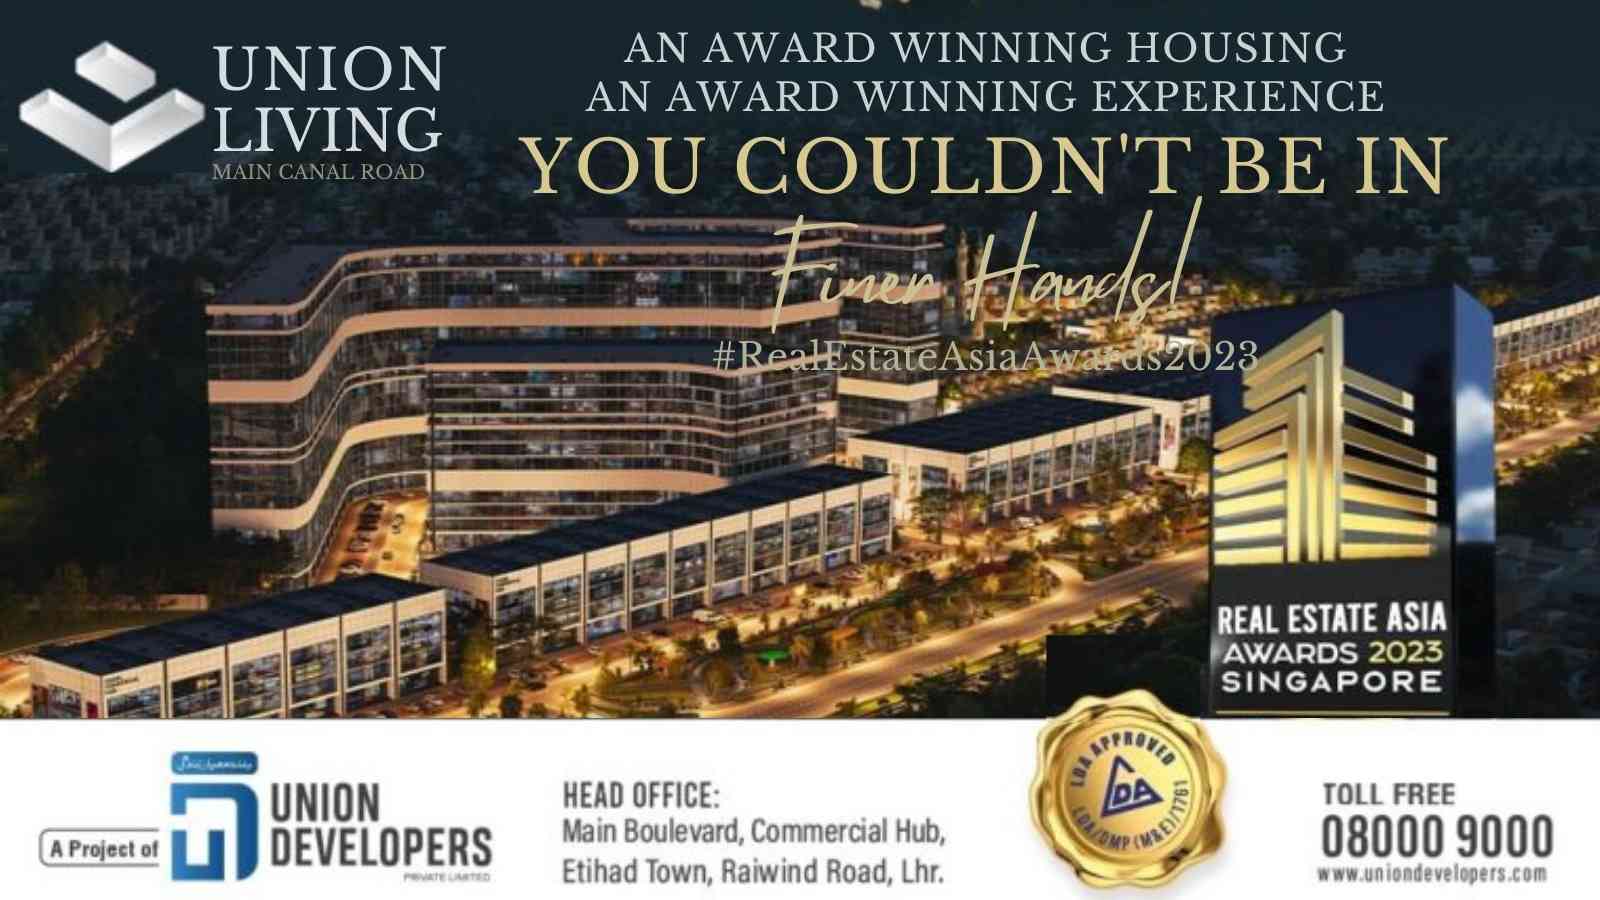 ApNews - Union Developers Secures Real Estate Asia Awards Win for Housing